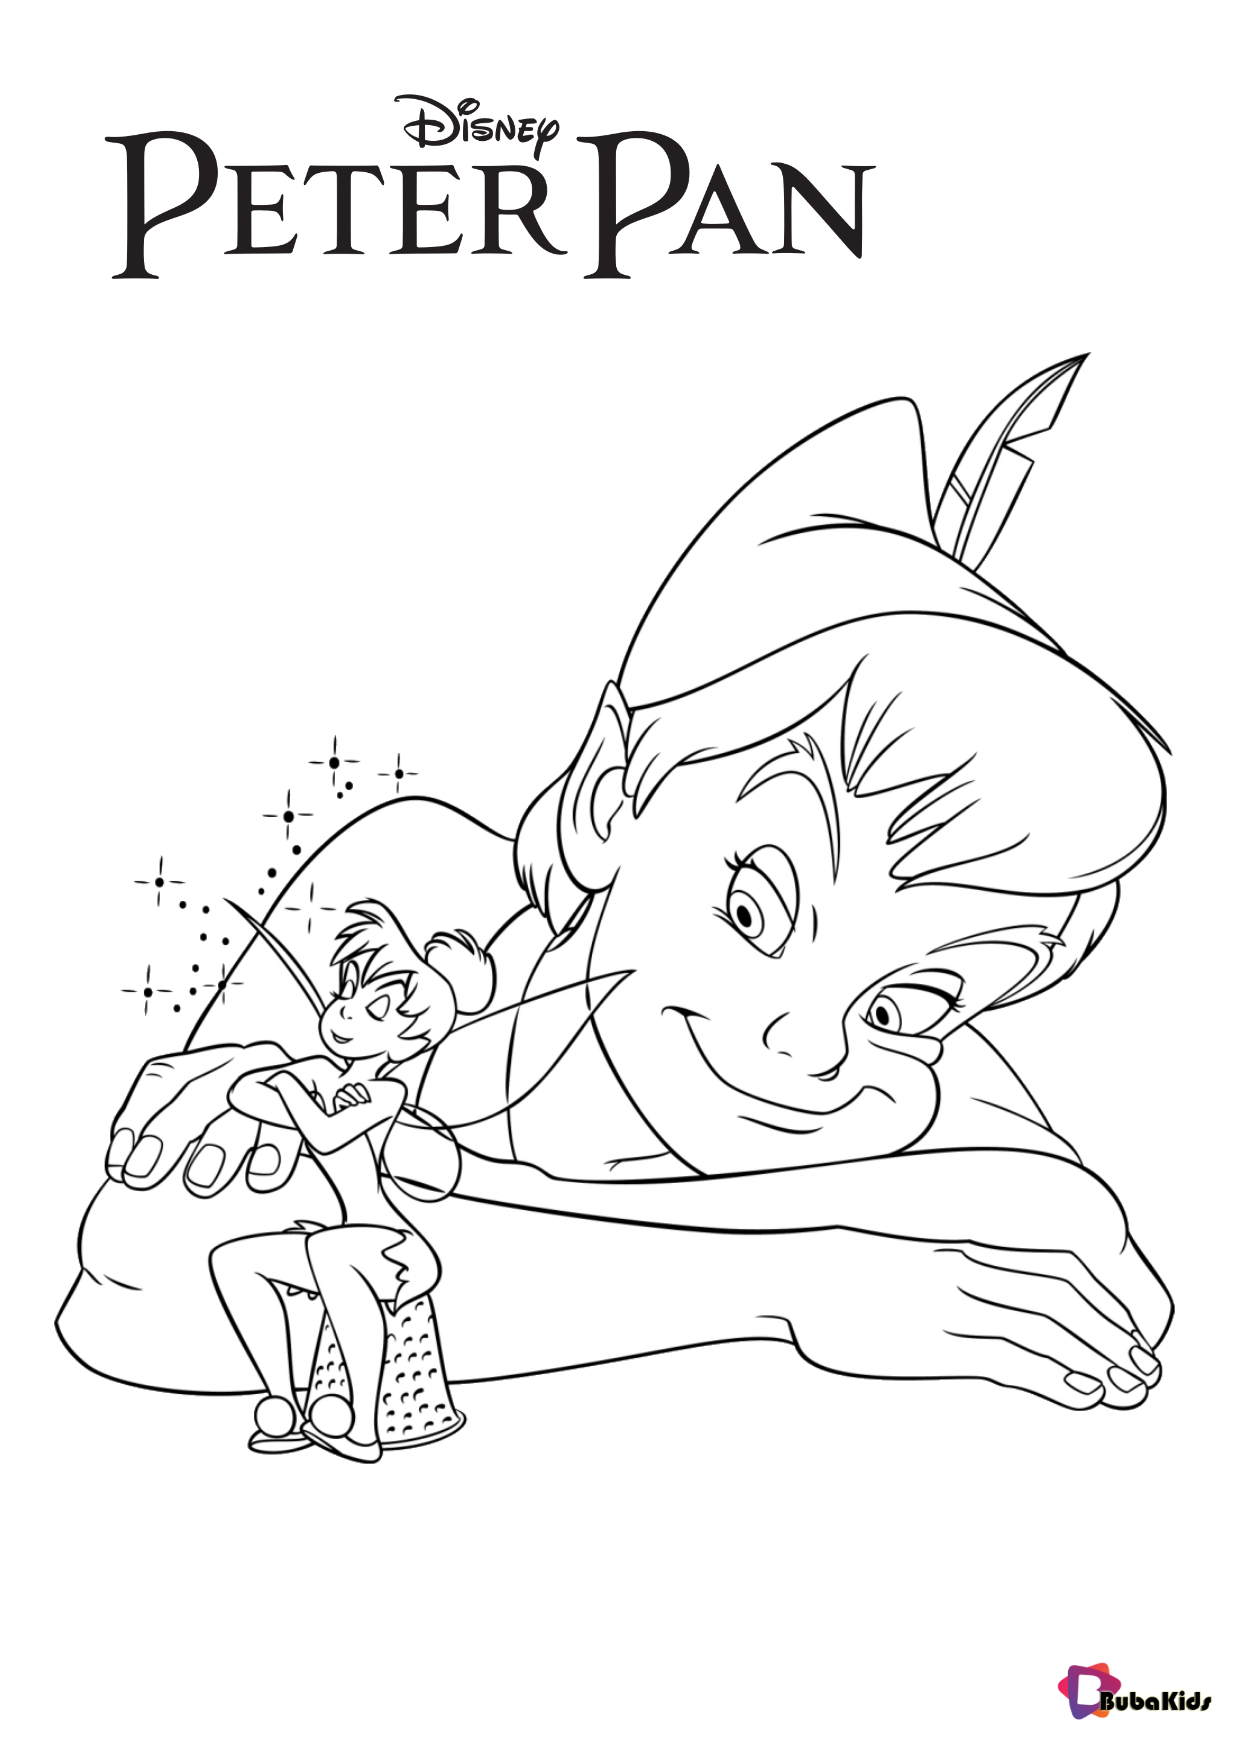 Peter Pan and tinkerbell coloring page Wallpaper